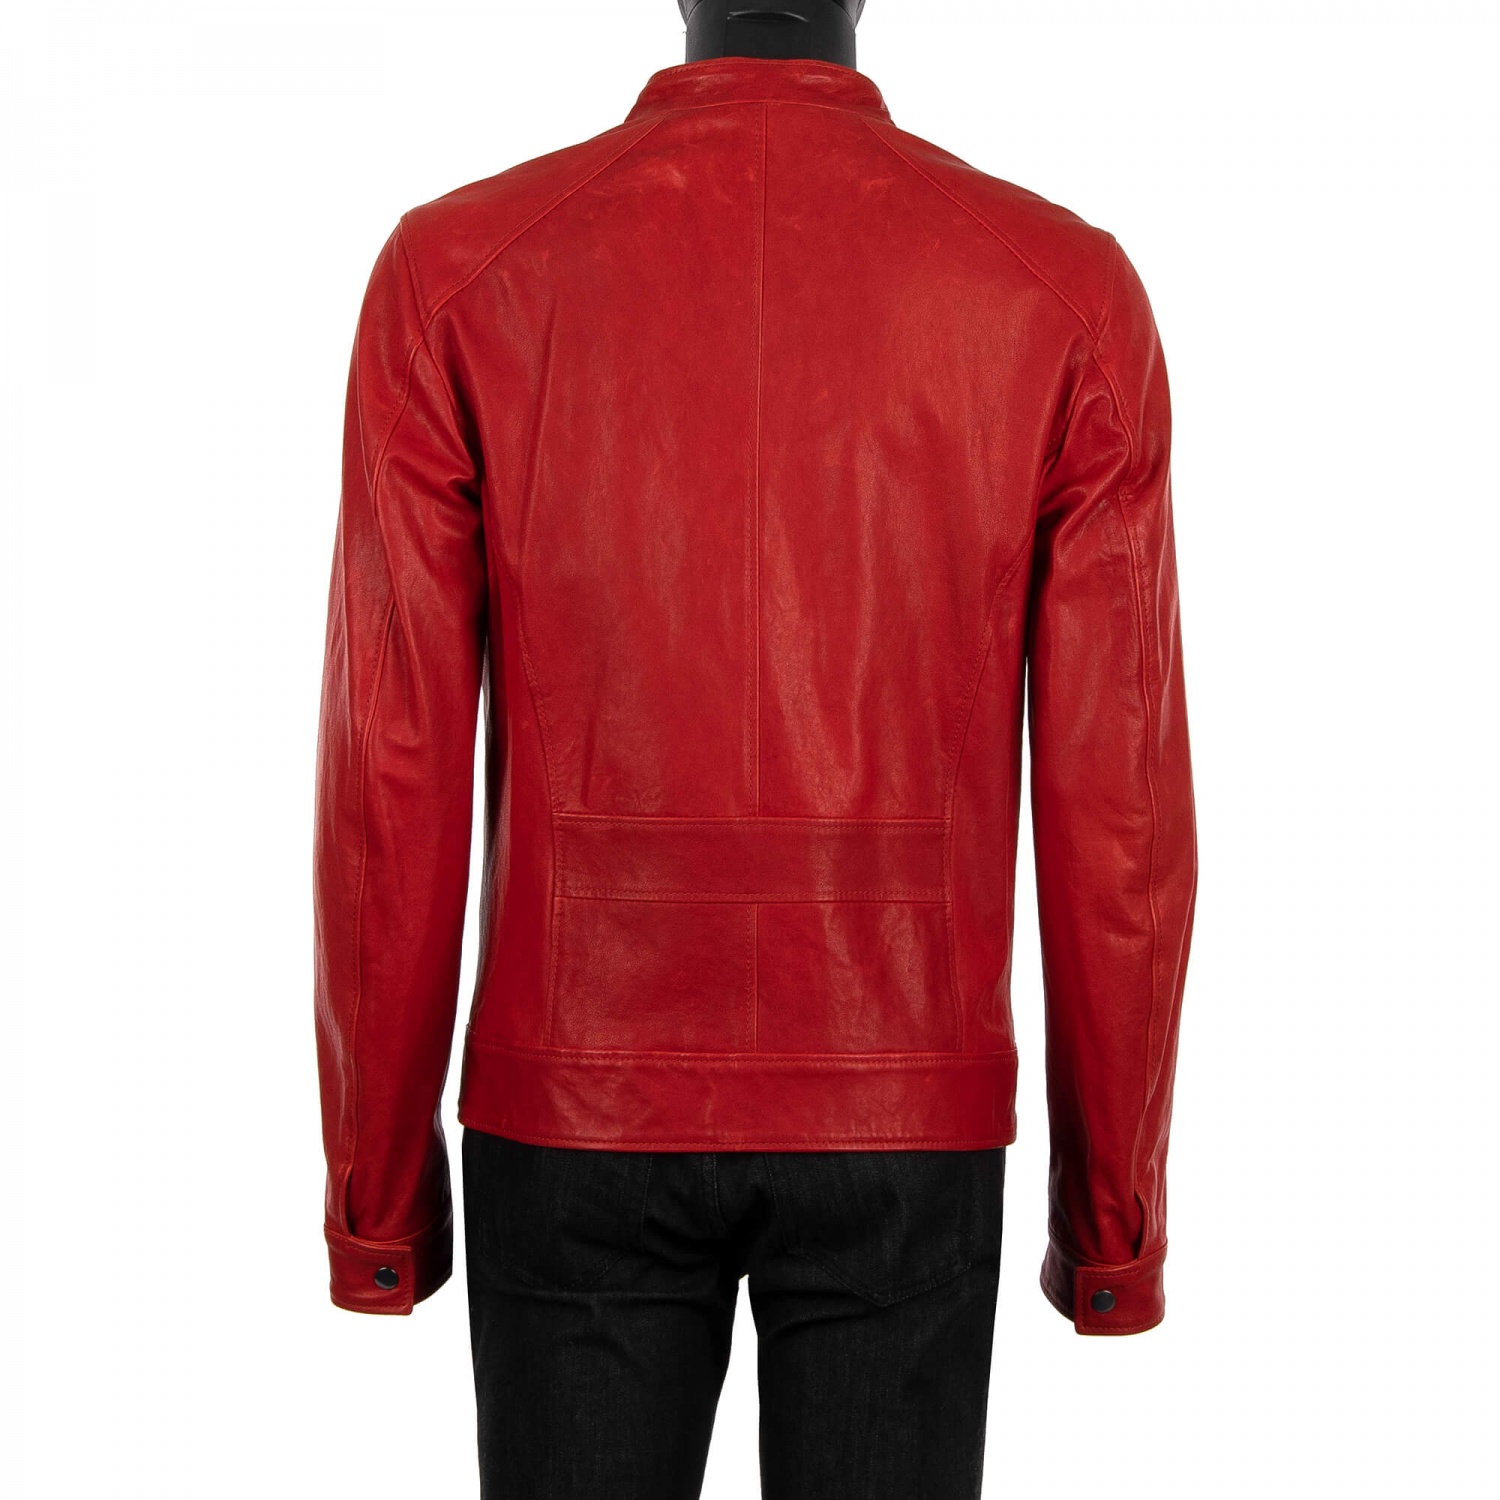 DOLCE & GABBANA Biker Style Lamb Leather Jacket with Pockets Red 08892 ...